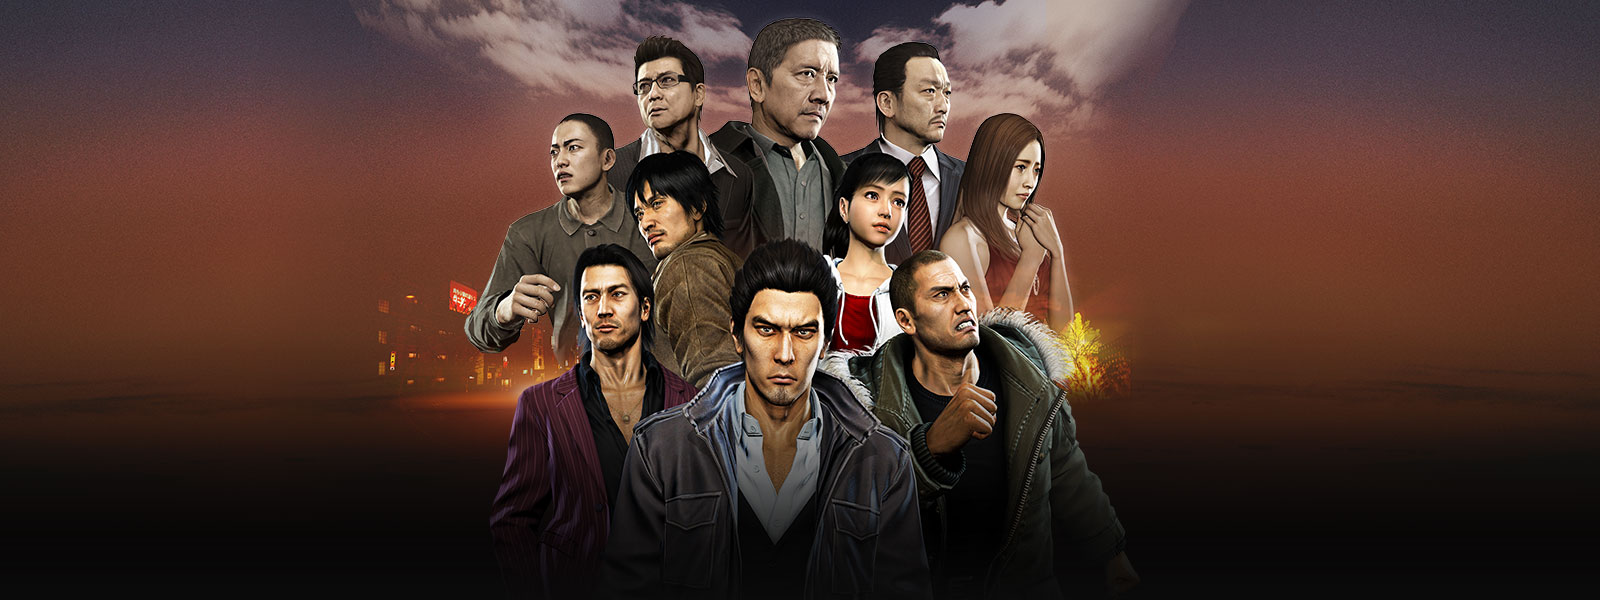 Kazuma Kiryu standing in front of a collage of Tojo Clan and Omi Alliance characters over a foggy city scene